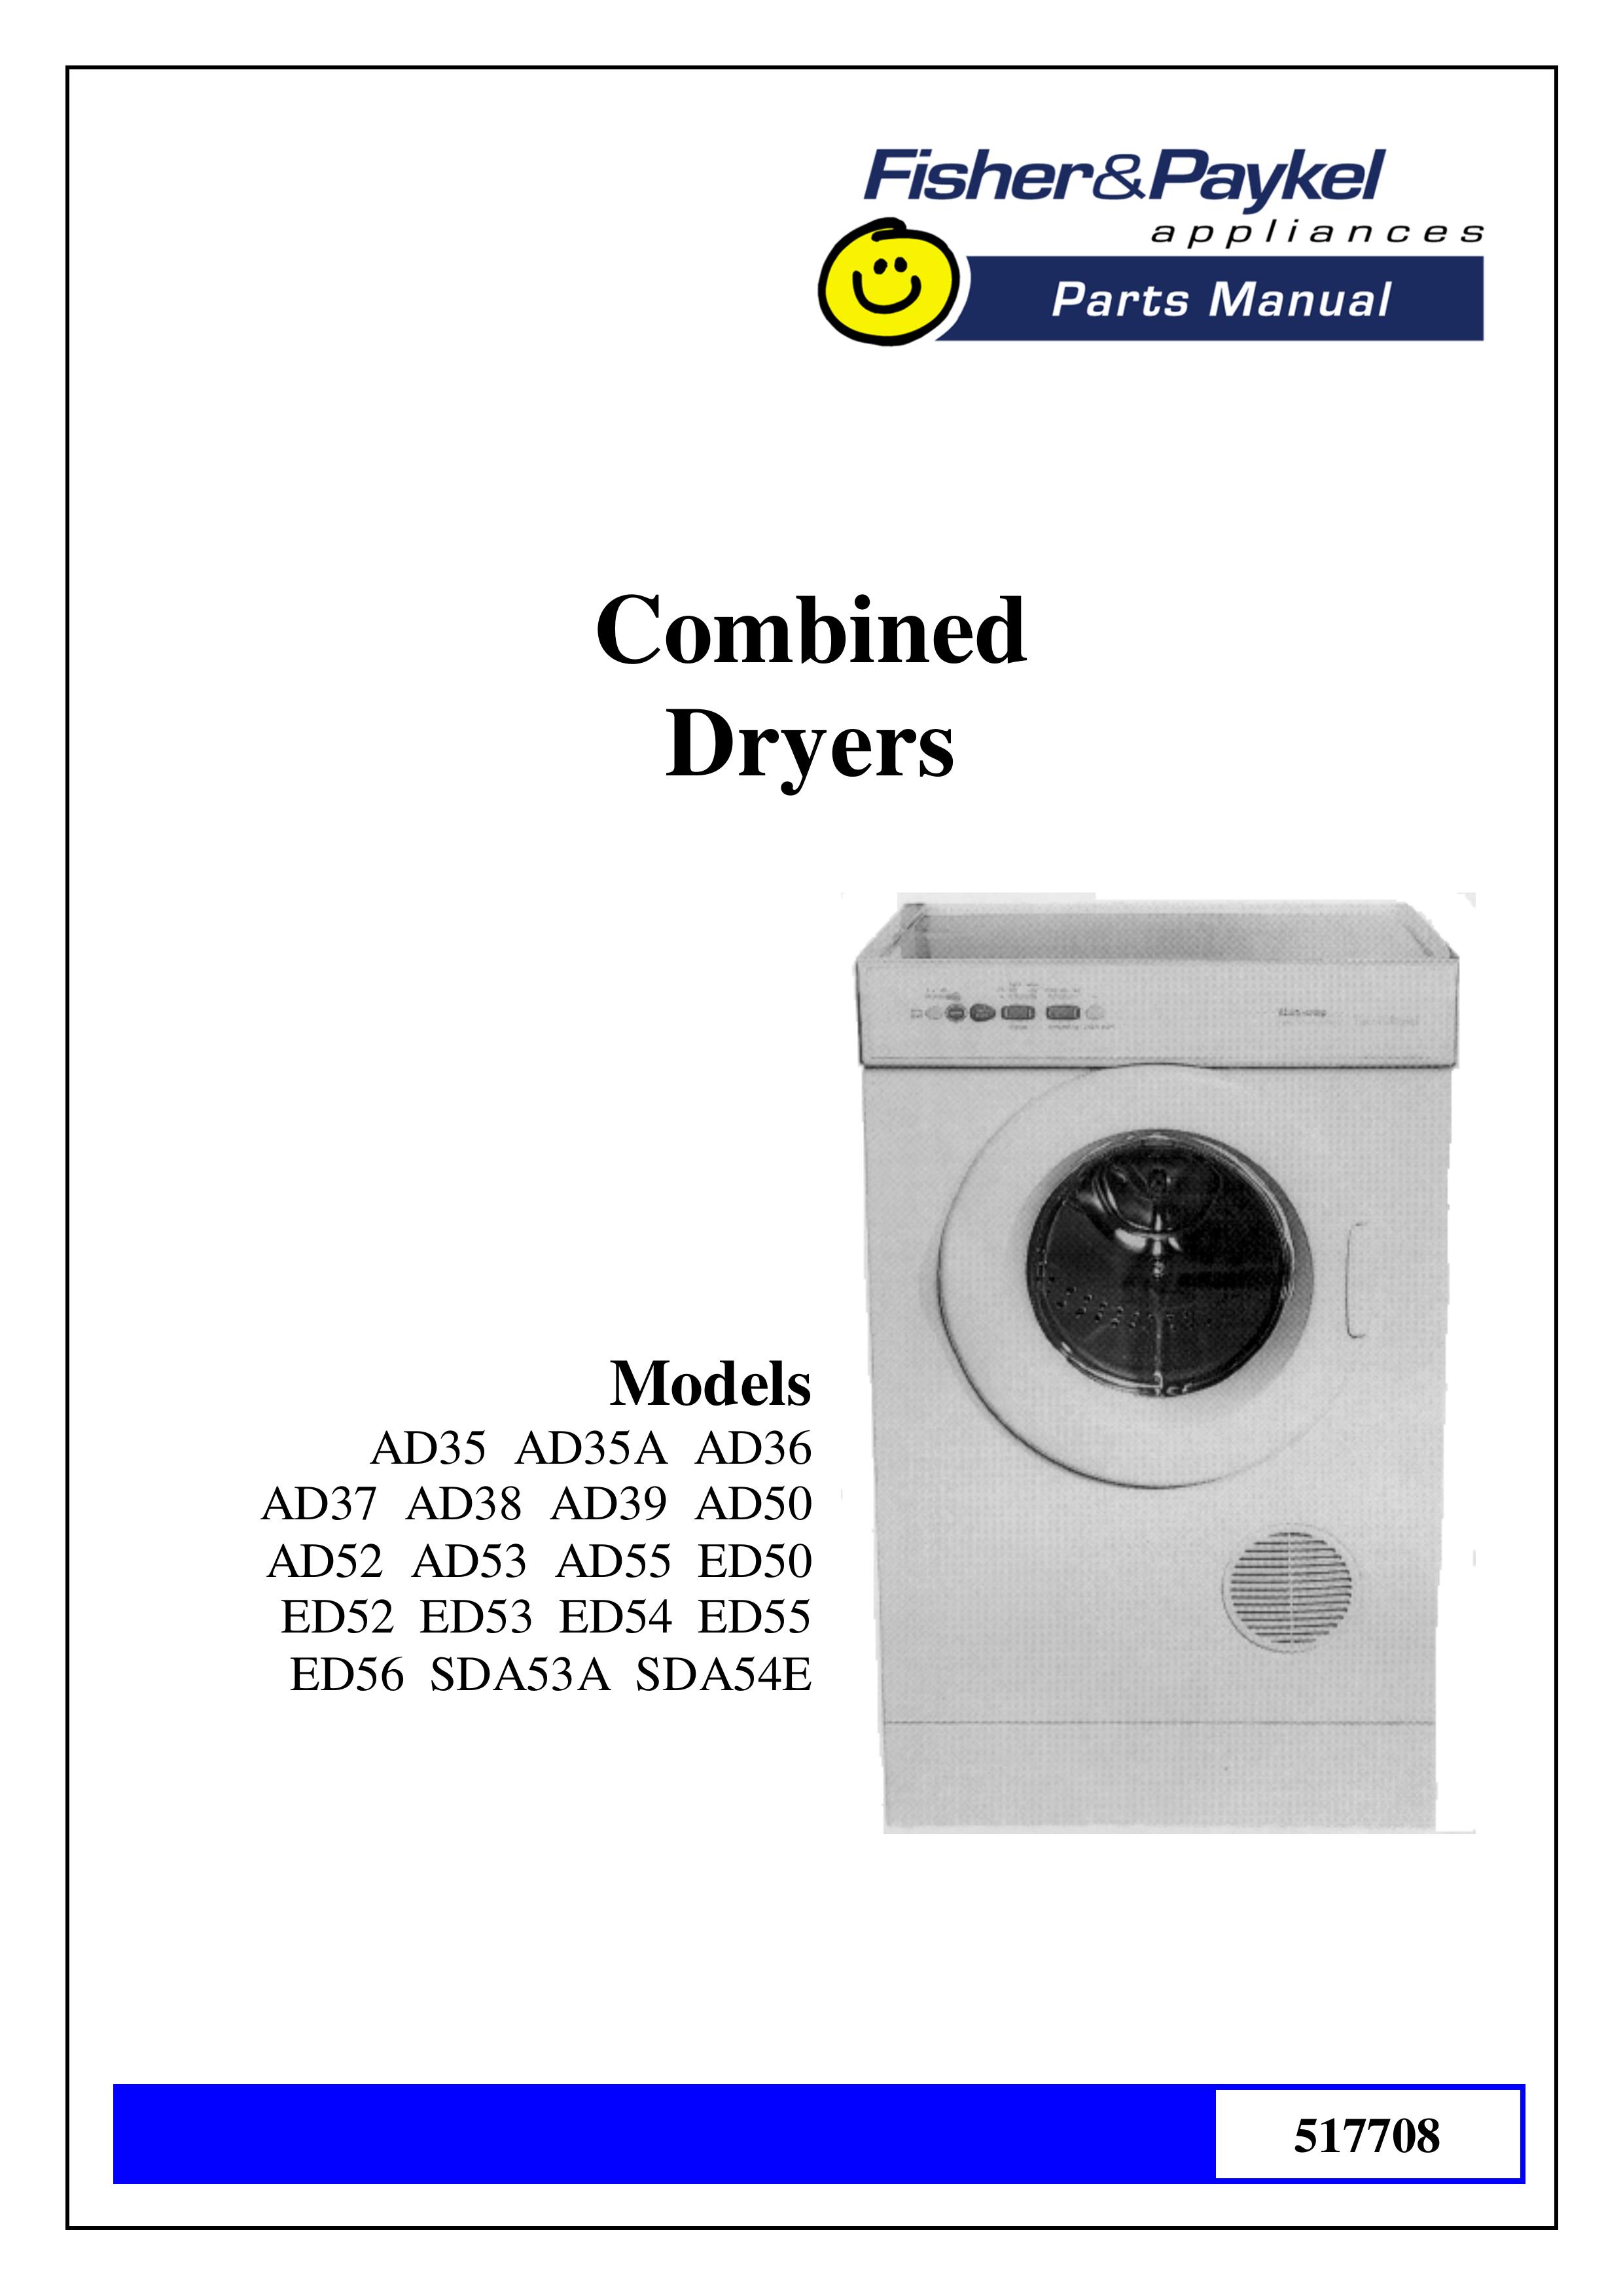 Fisher & Paykel ED54 Clothes Dryer User Manual